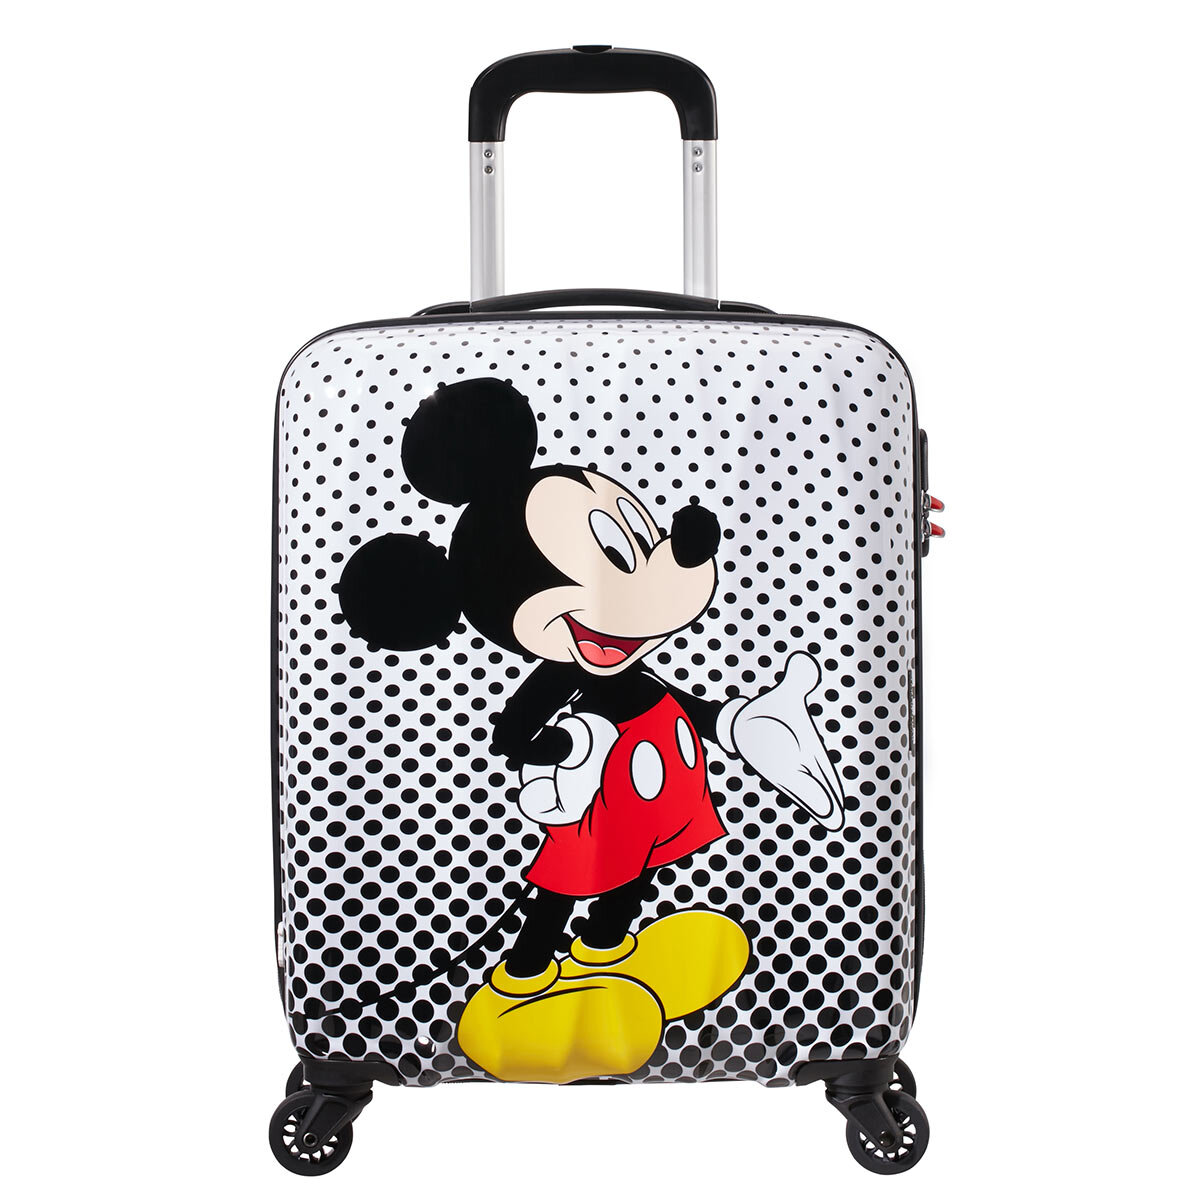 American Tourister American Tourister Disney Minnie oh my polka dot Carry On Cabin Case 36L  